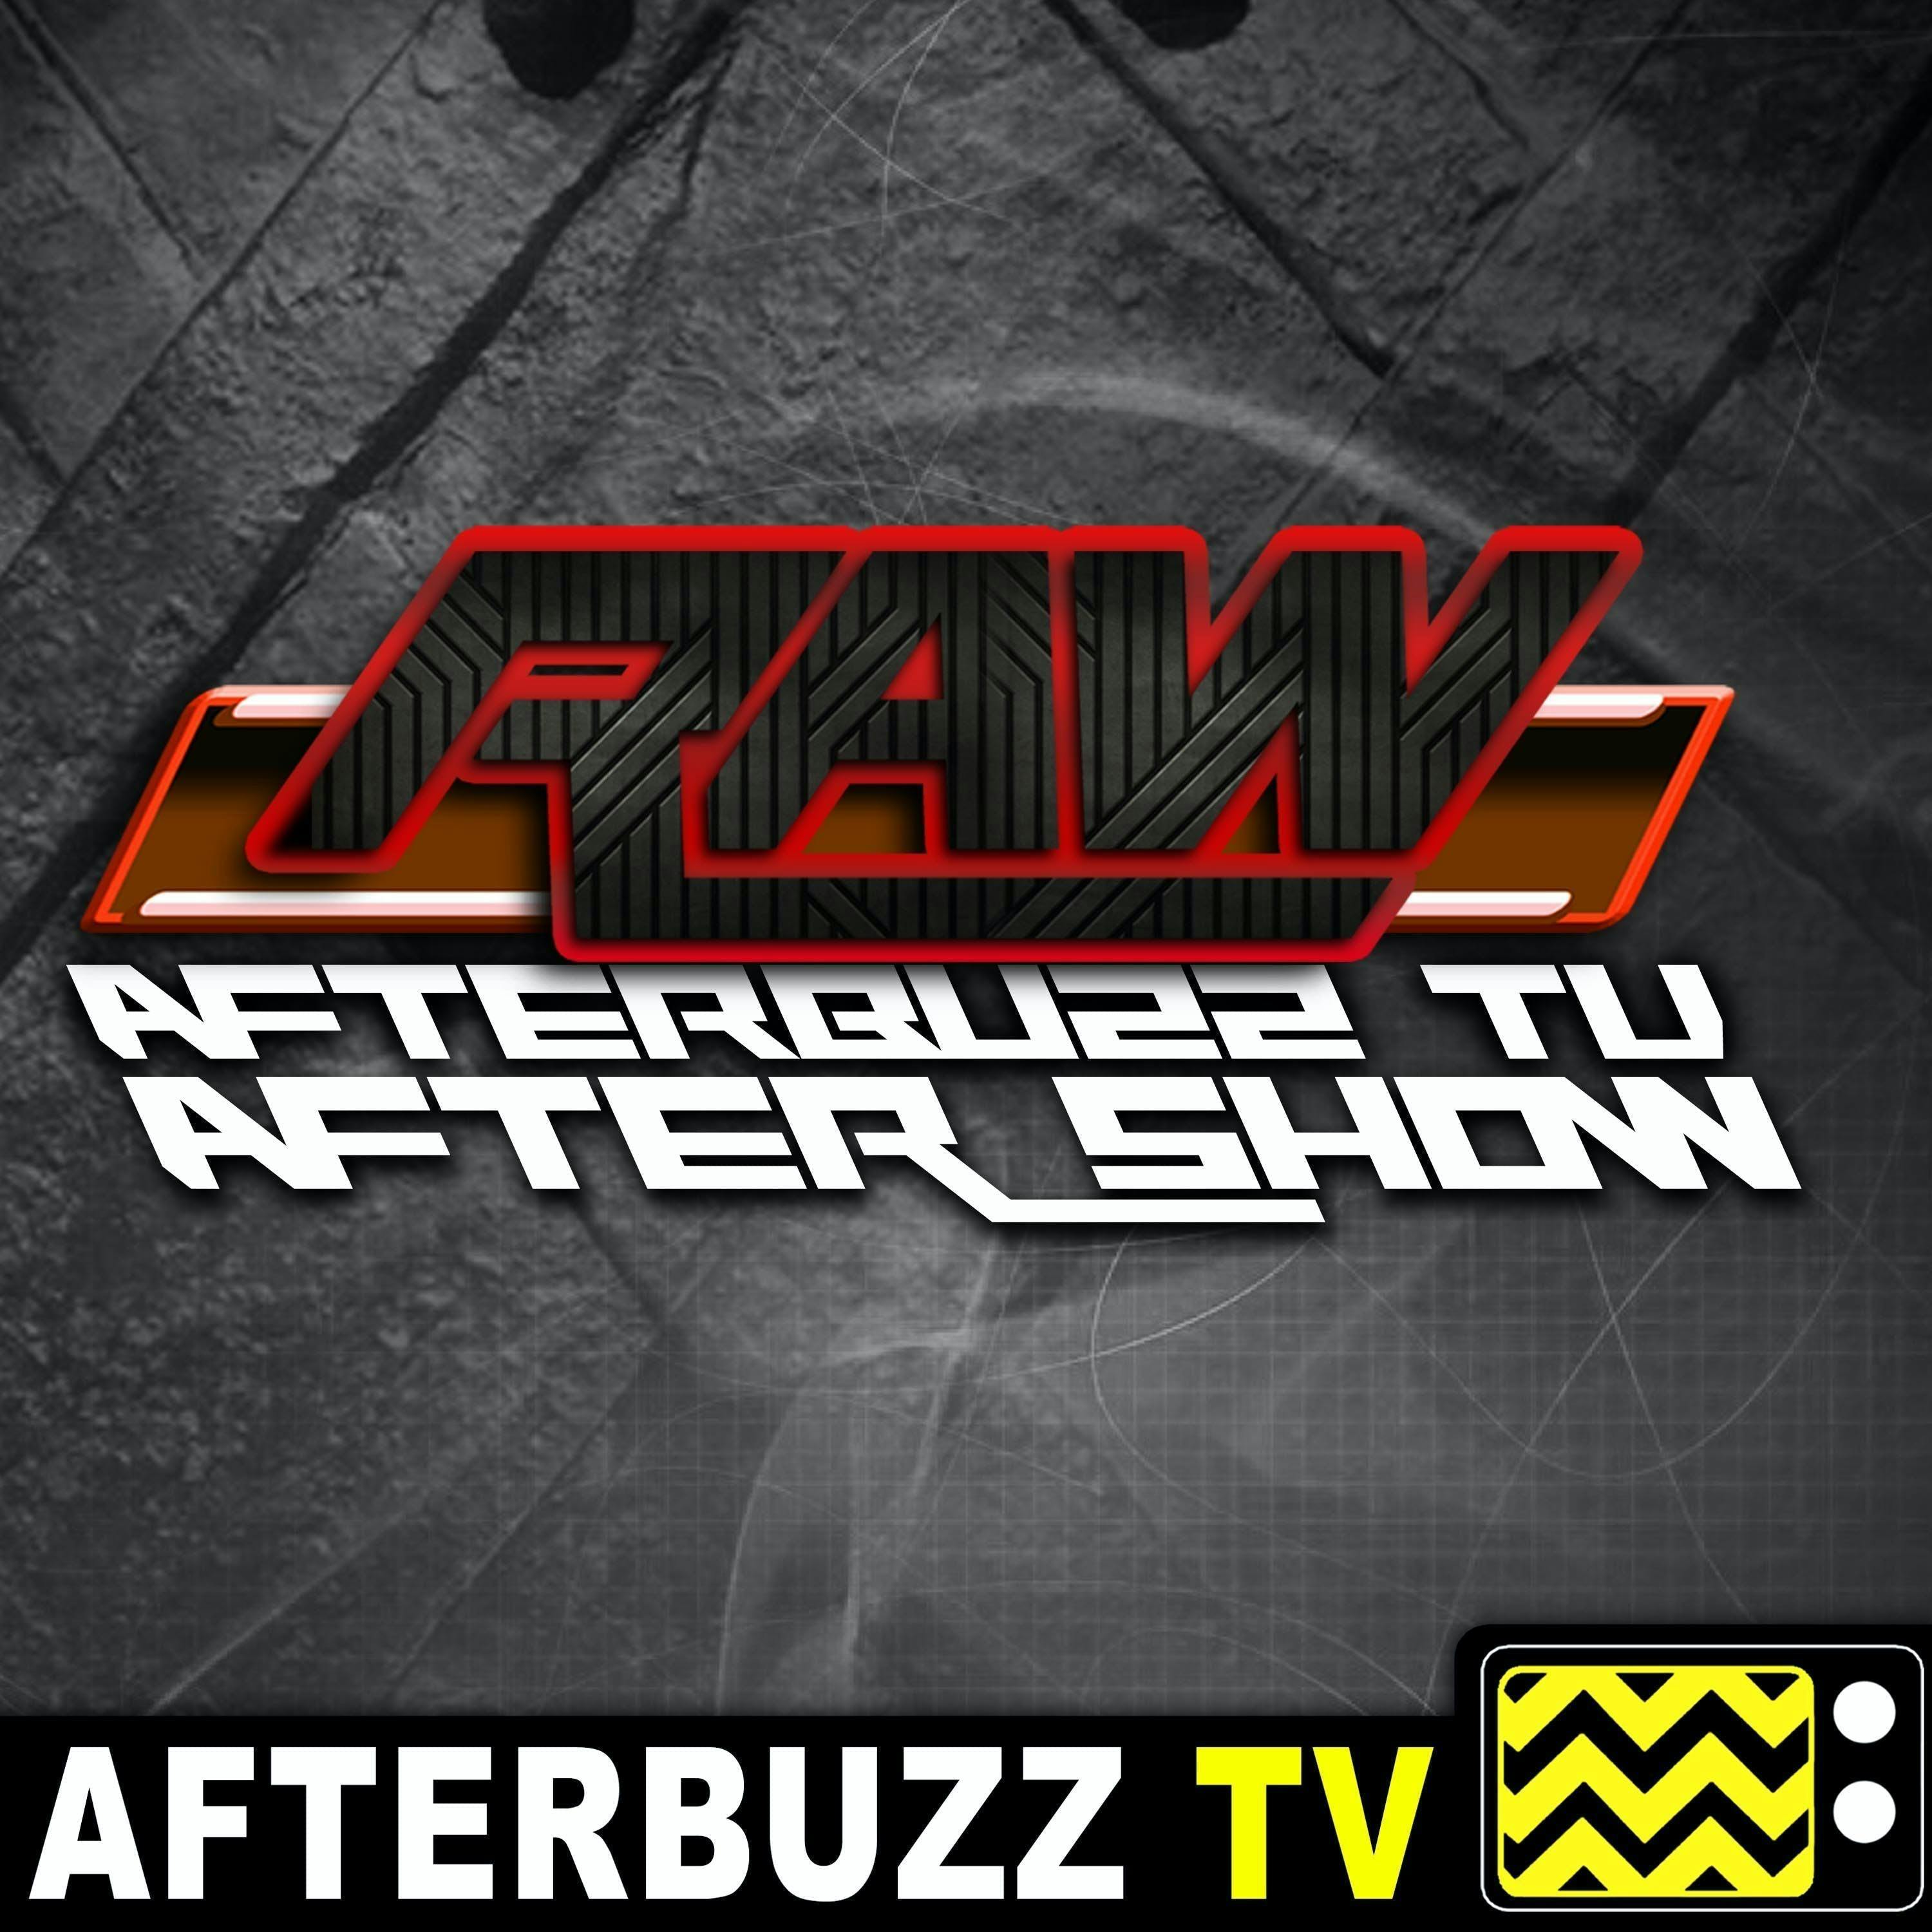 The Unofficial WWE RAW After Show